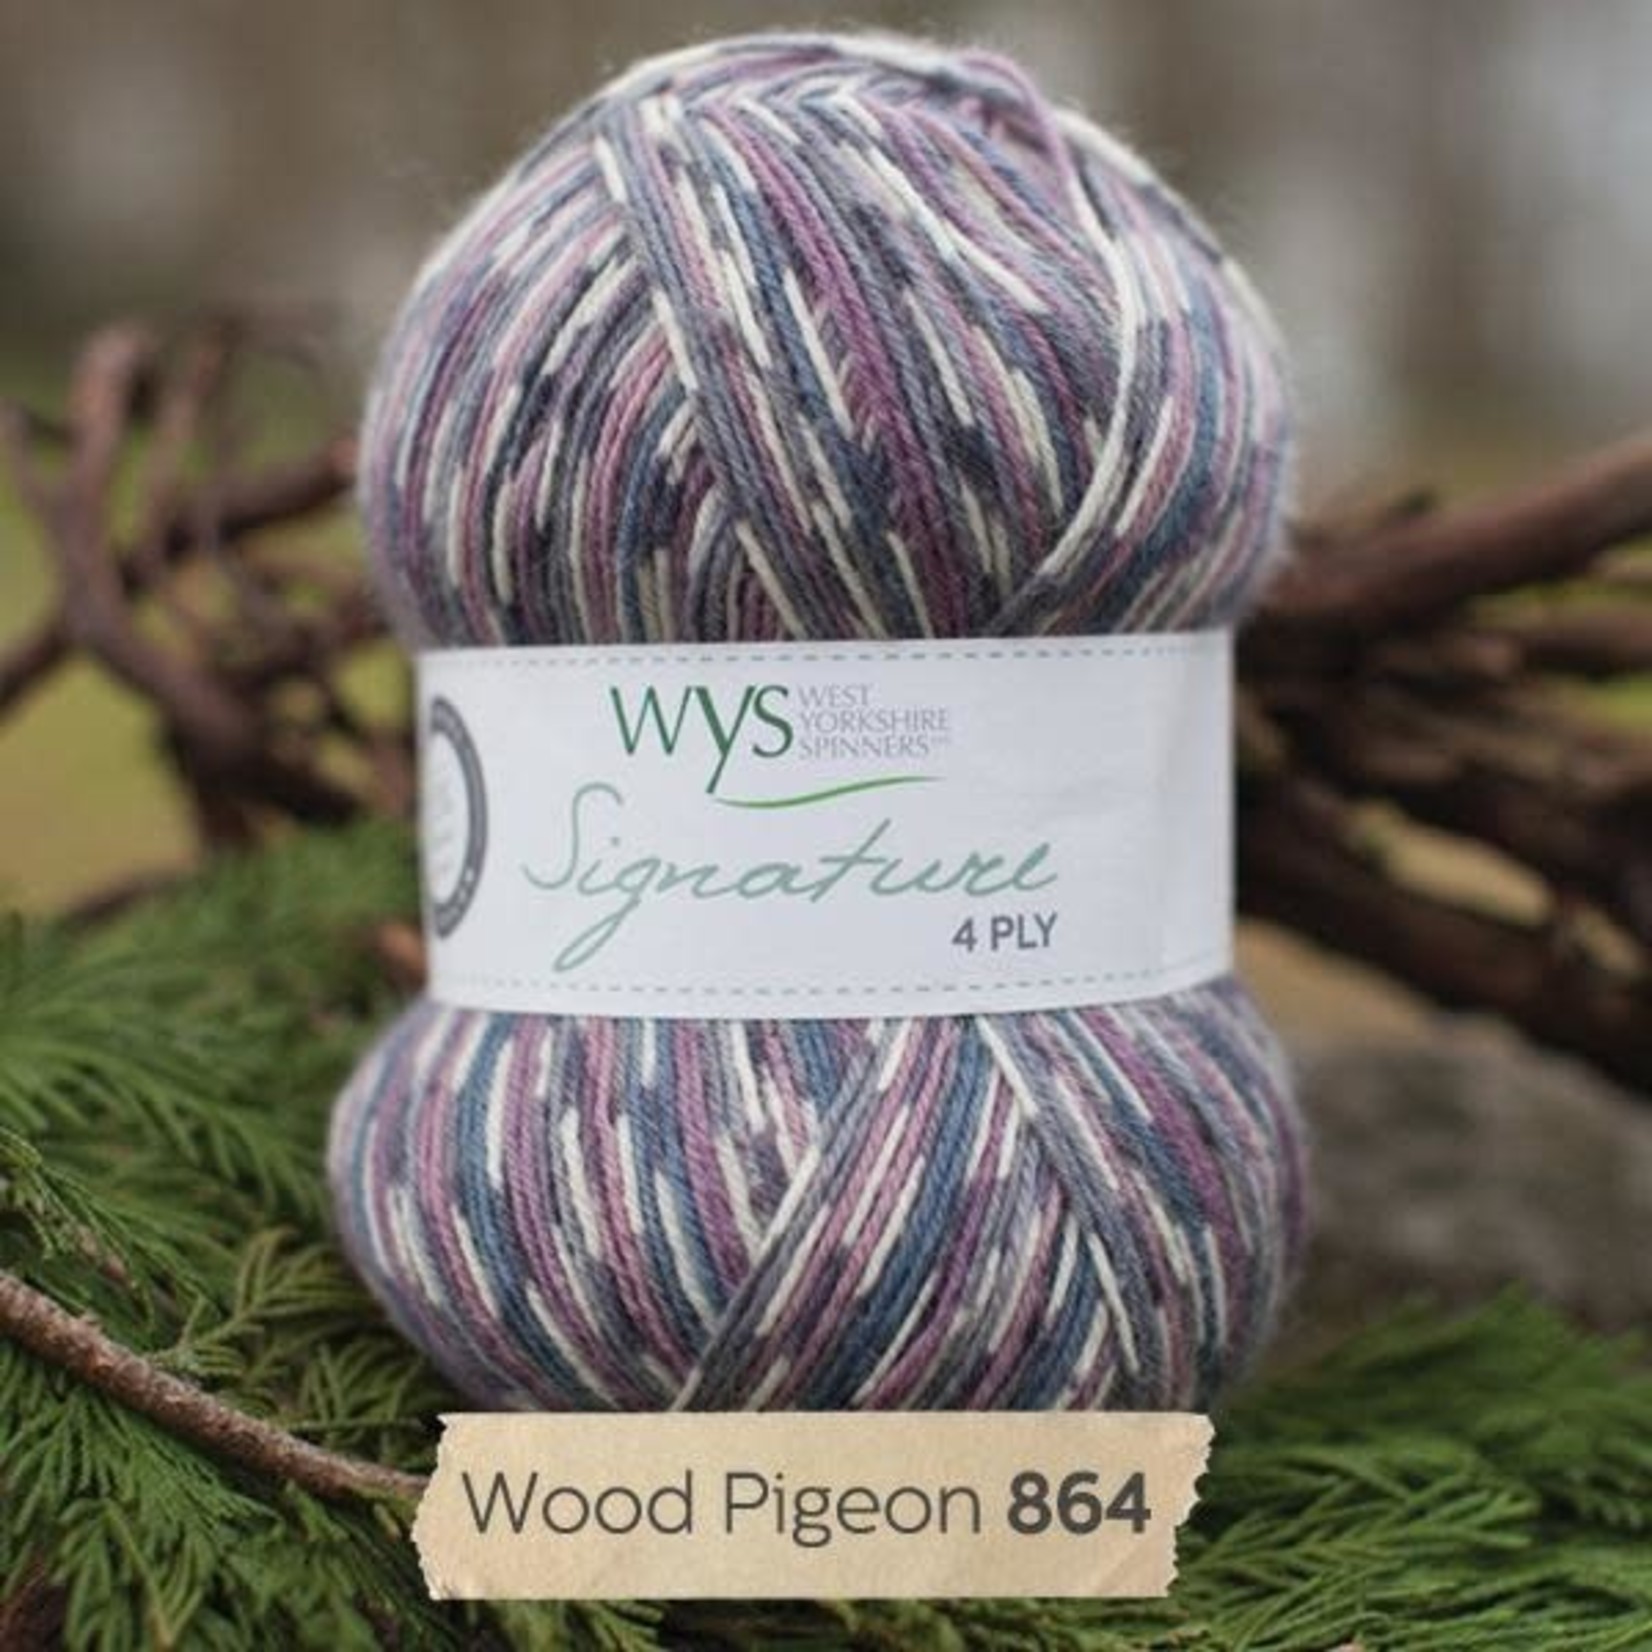 West Yorkshire Spinners Signature 4ply "Country Birds Collection" by West Yorkshire Spinners